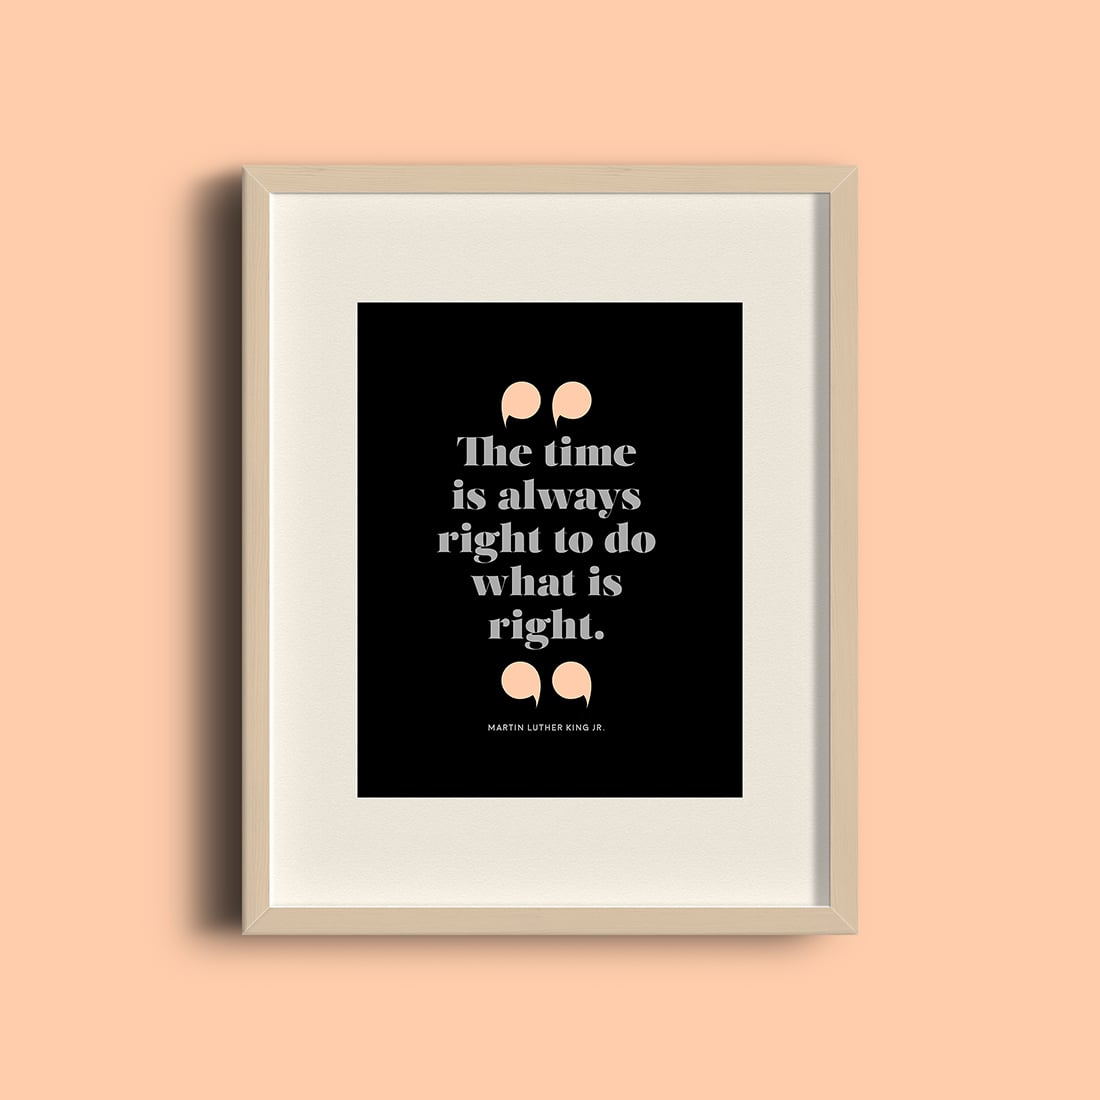 Martin Luther King Jr. Quote • Free Printable • Little Gold Pixel